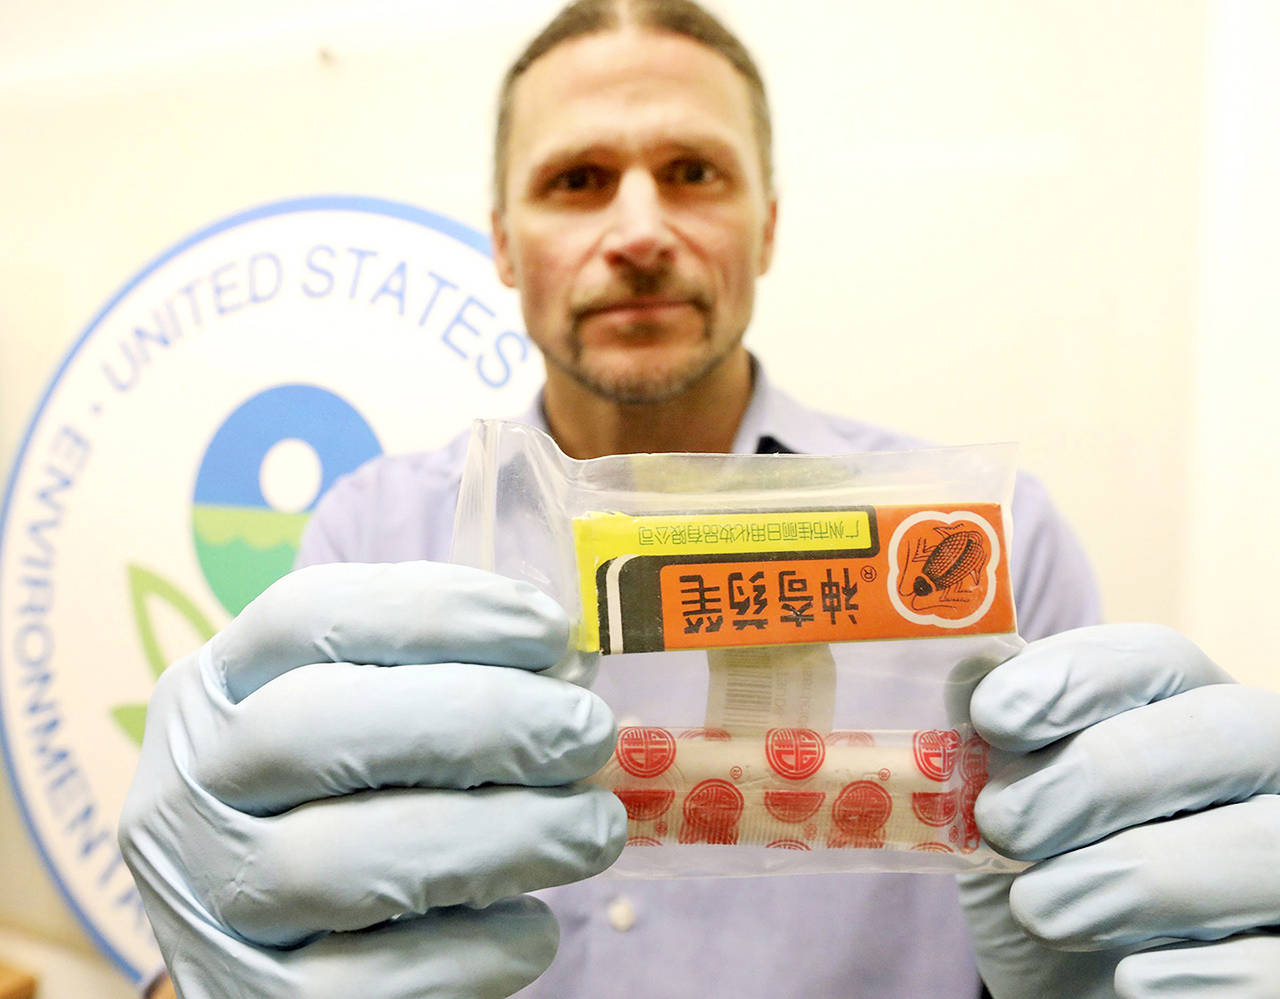 Environmental Protection Agency enforcement officer Chad Schulze displays one of the banned pesticides that investigators say was listed for sale on Amazon. (Greg Gilbert/The Seattle Times via AP)